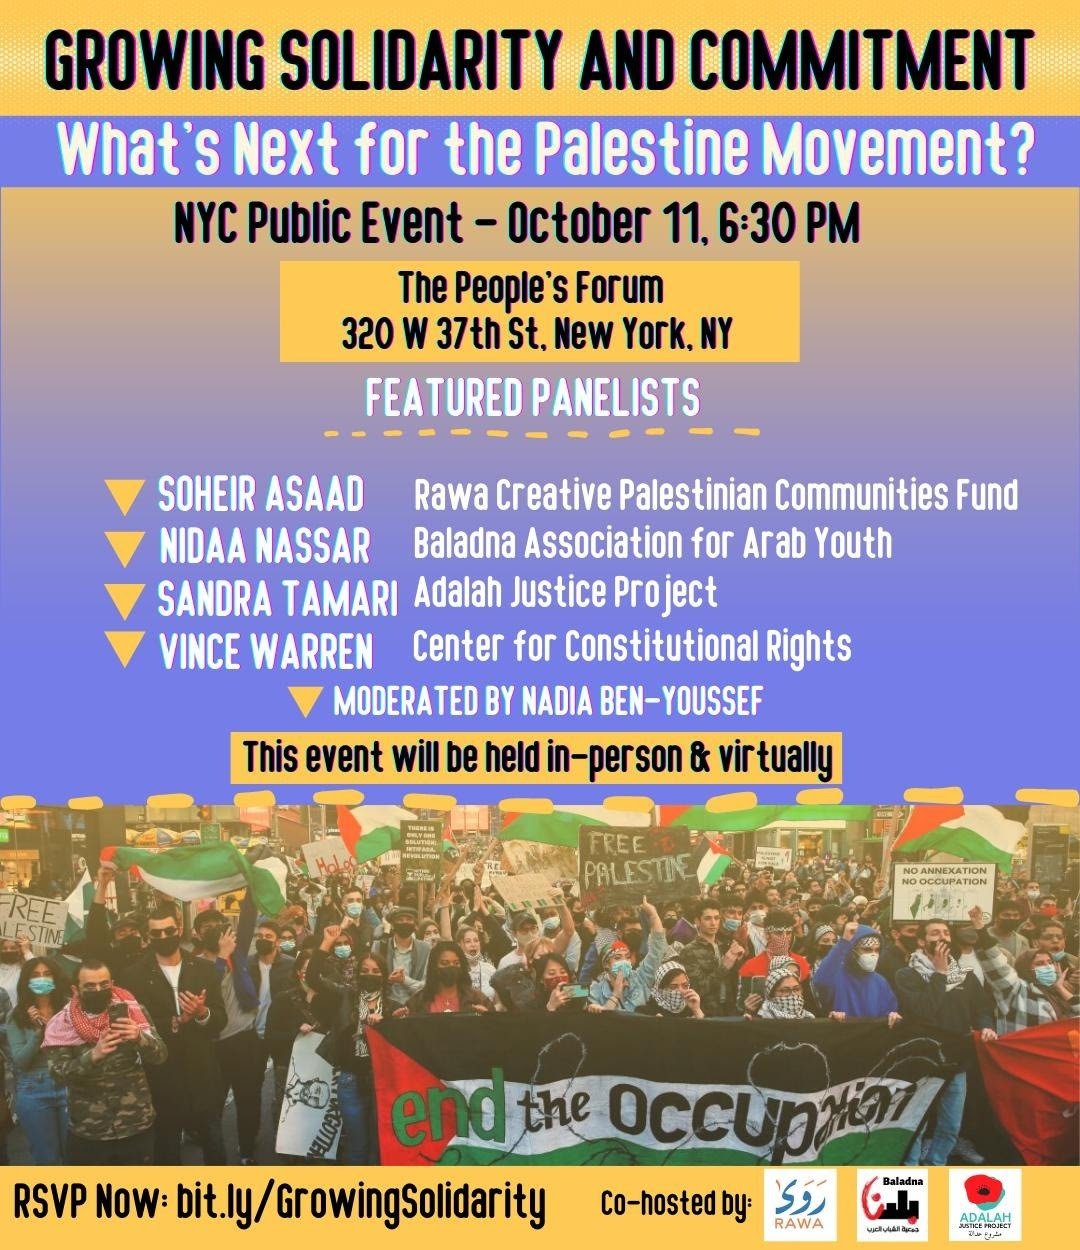 Flyer for the public event "Growing Solidarity and Commitment: What’s Next for the Palestine Movement?" happening in-person and virtually on Tuesday, October 11th at 6:30 pm ET.